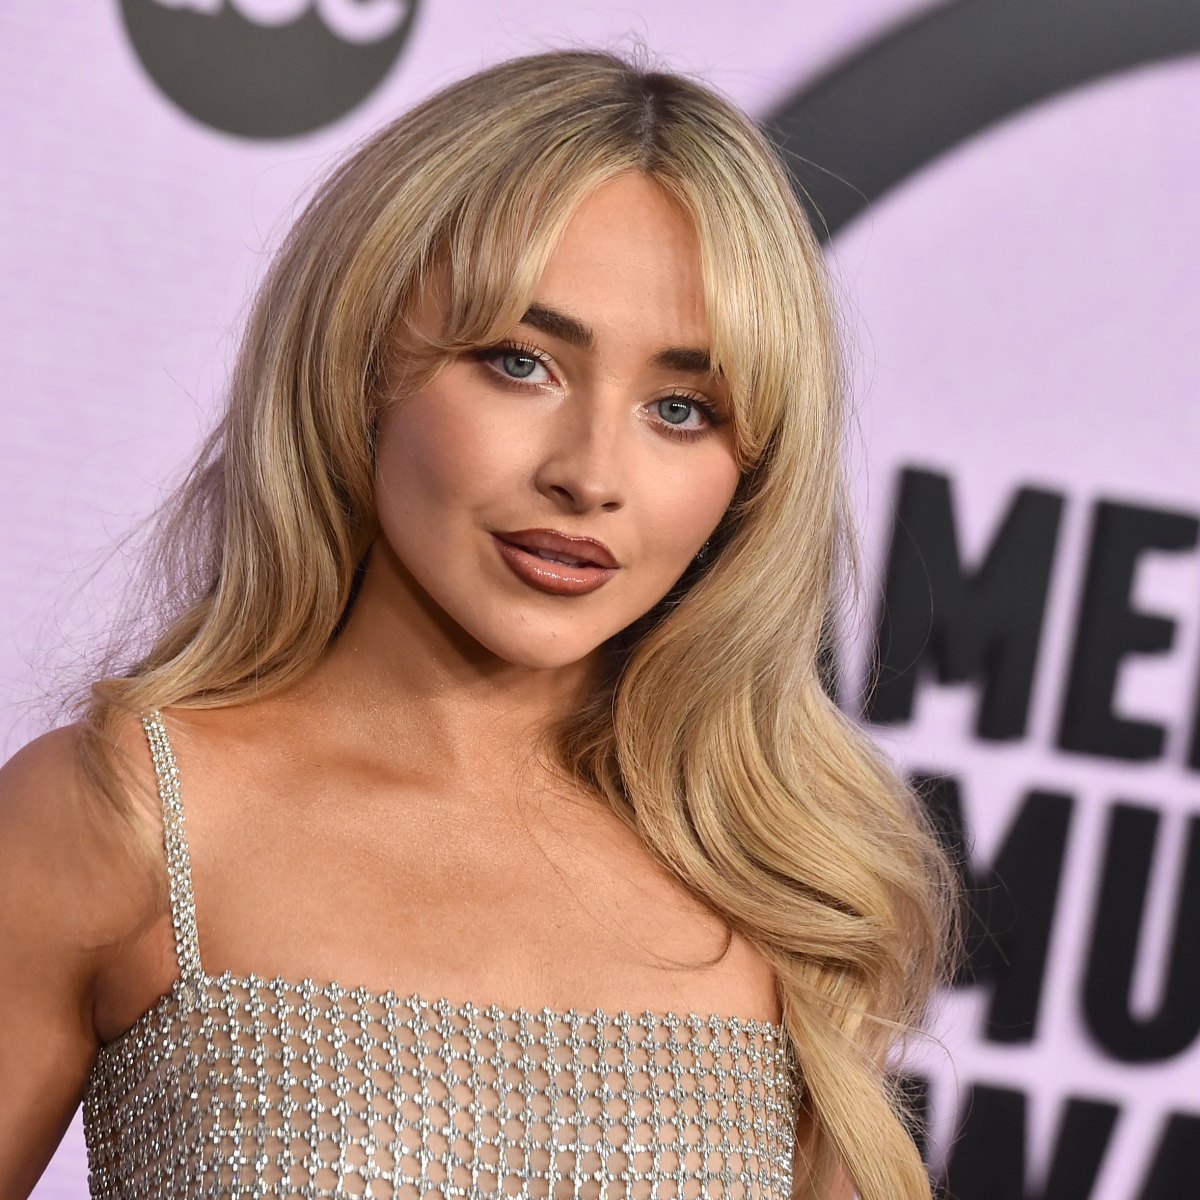 Sabrina Carpenter Porn Sex - All The Celebrities Who Opened Up About Mental Health Issues